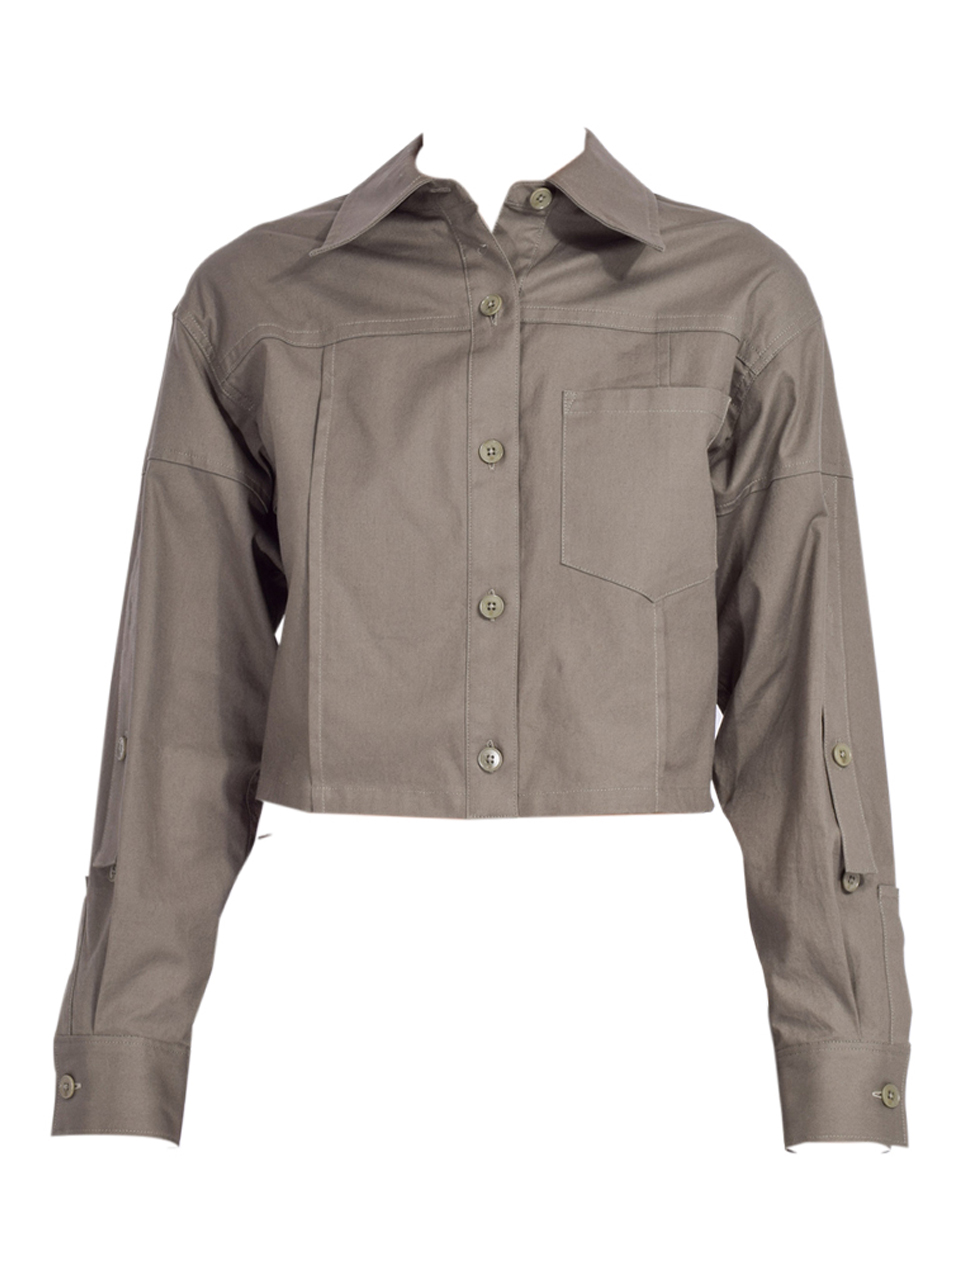 3.1 Phillip Lim Cropped Convertible Shirt Jacket in Army Product Shot